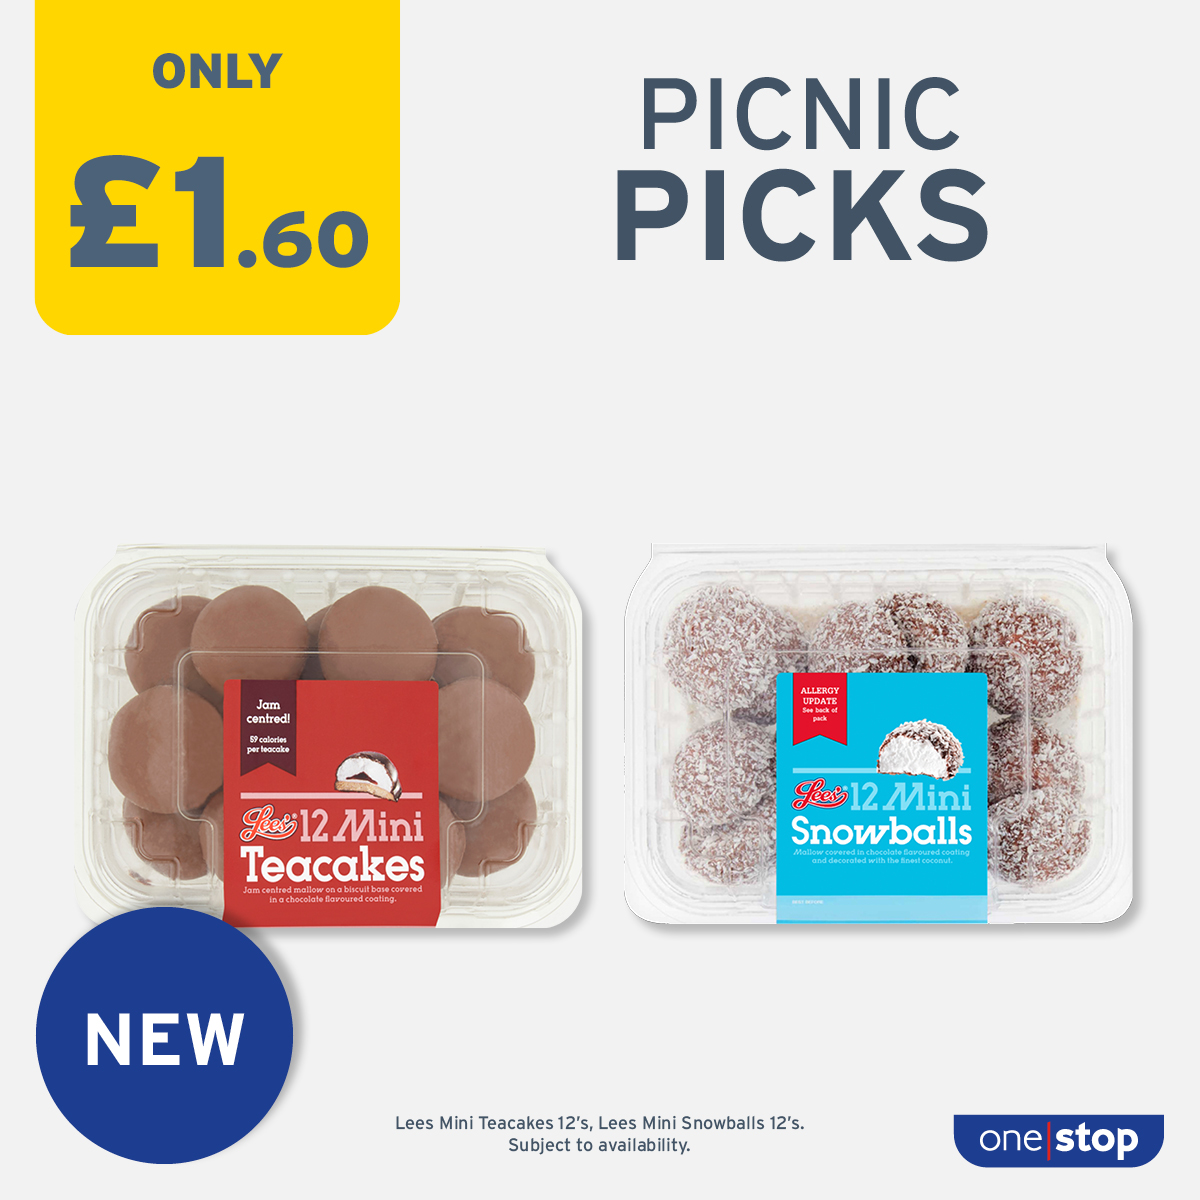 Get ready for the weekend with NEW picnic sweet treats😍❤️. Find your local store 👉 onestop.co.uk/store-finder/ Subject to availability. Participating stores only. #Picnic